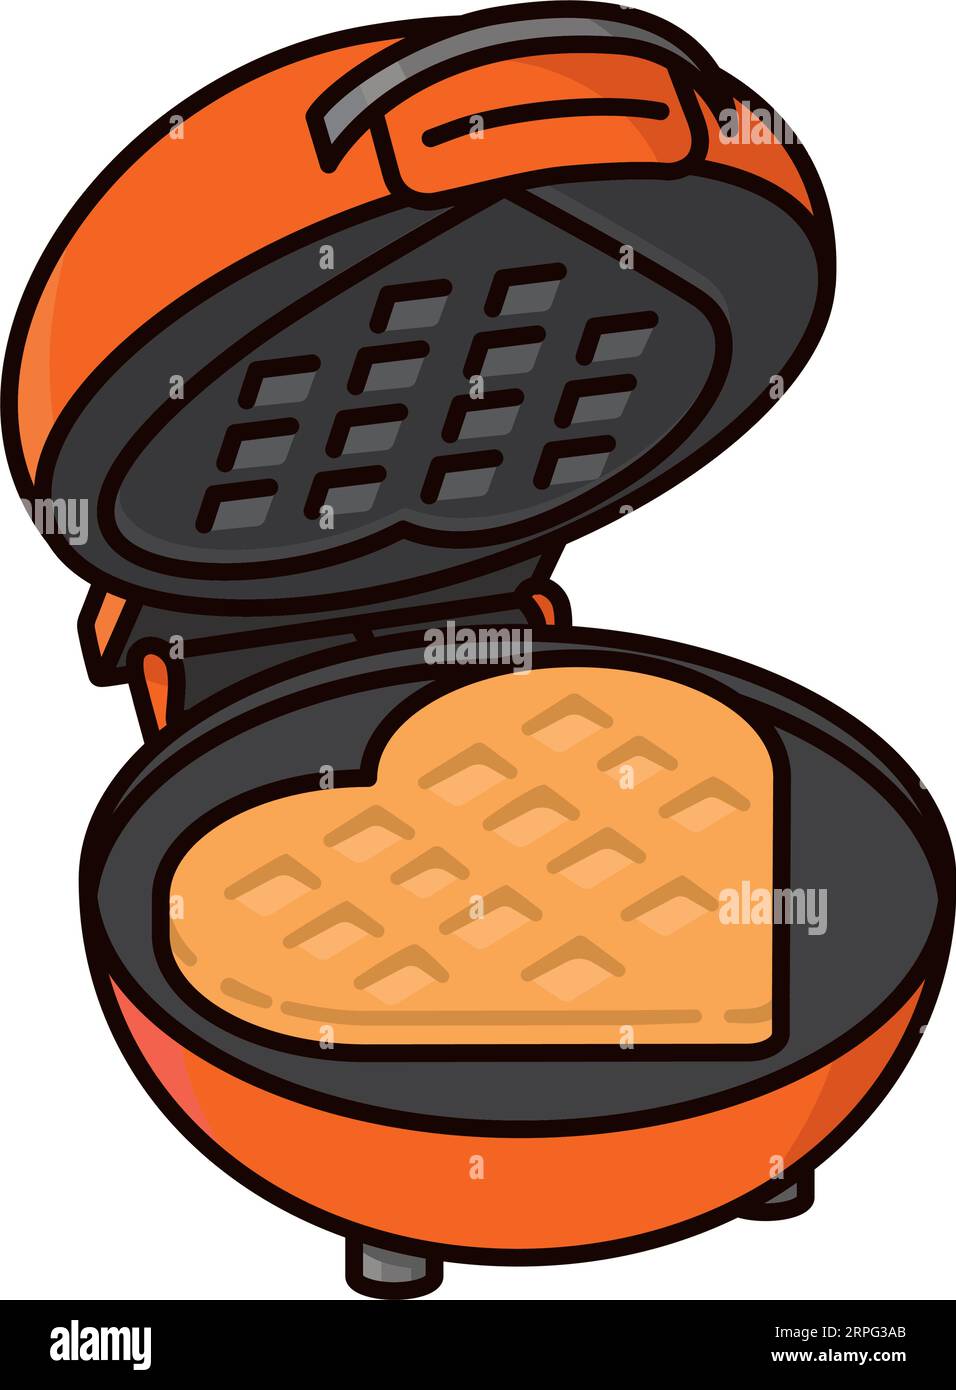 https://c8.alamy.com/comp/2RPG3AB/waffle-iron-with-heart-shaped-waffle-isolated-vector-illustration-for-waffle-iron-day-on-june-29-2RPG3AB.jpg